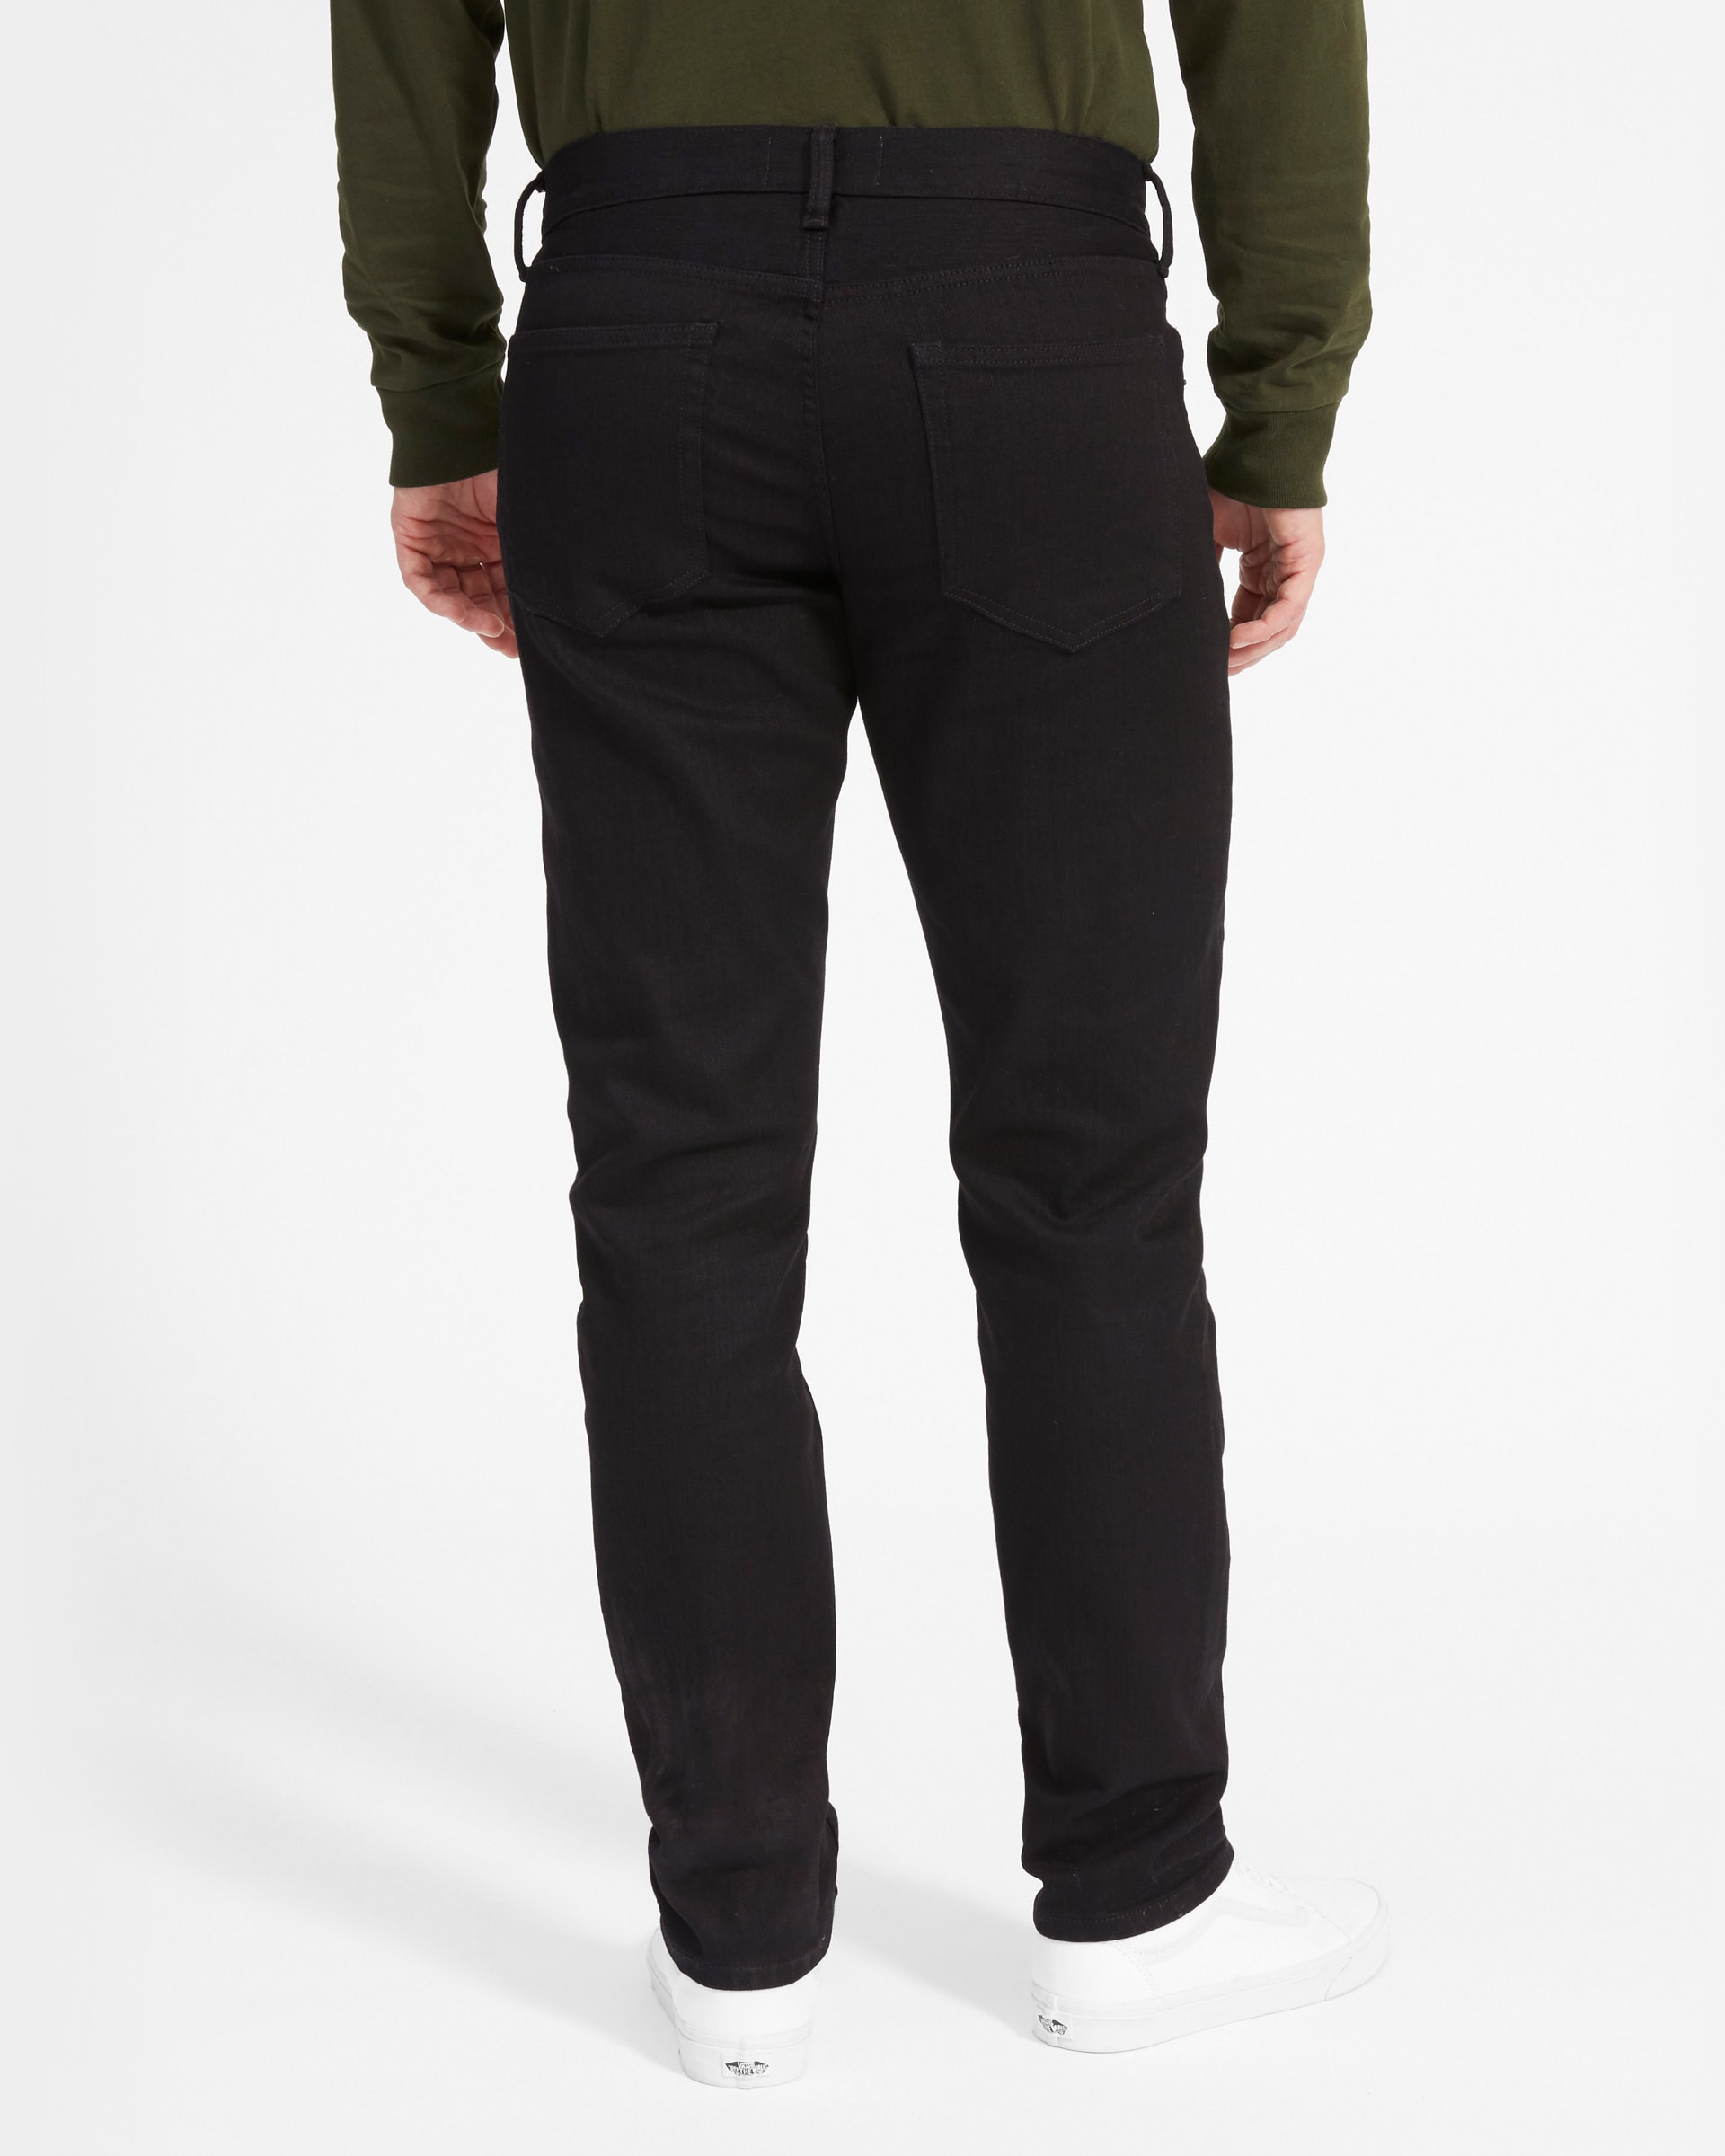 The Athletic Fit Jean Black – Everlane